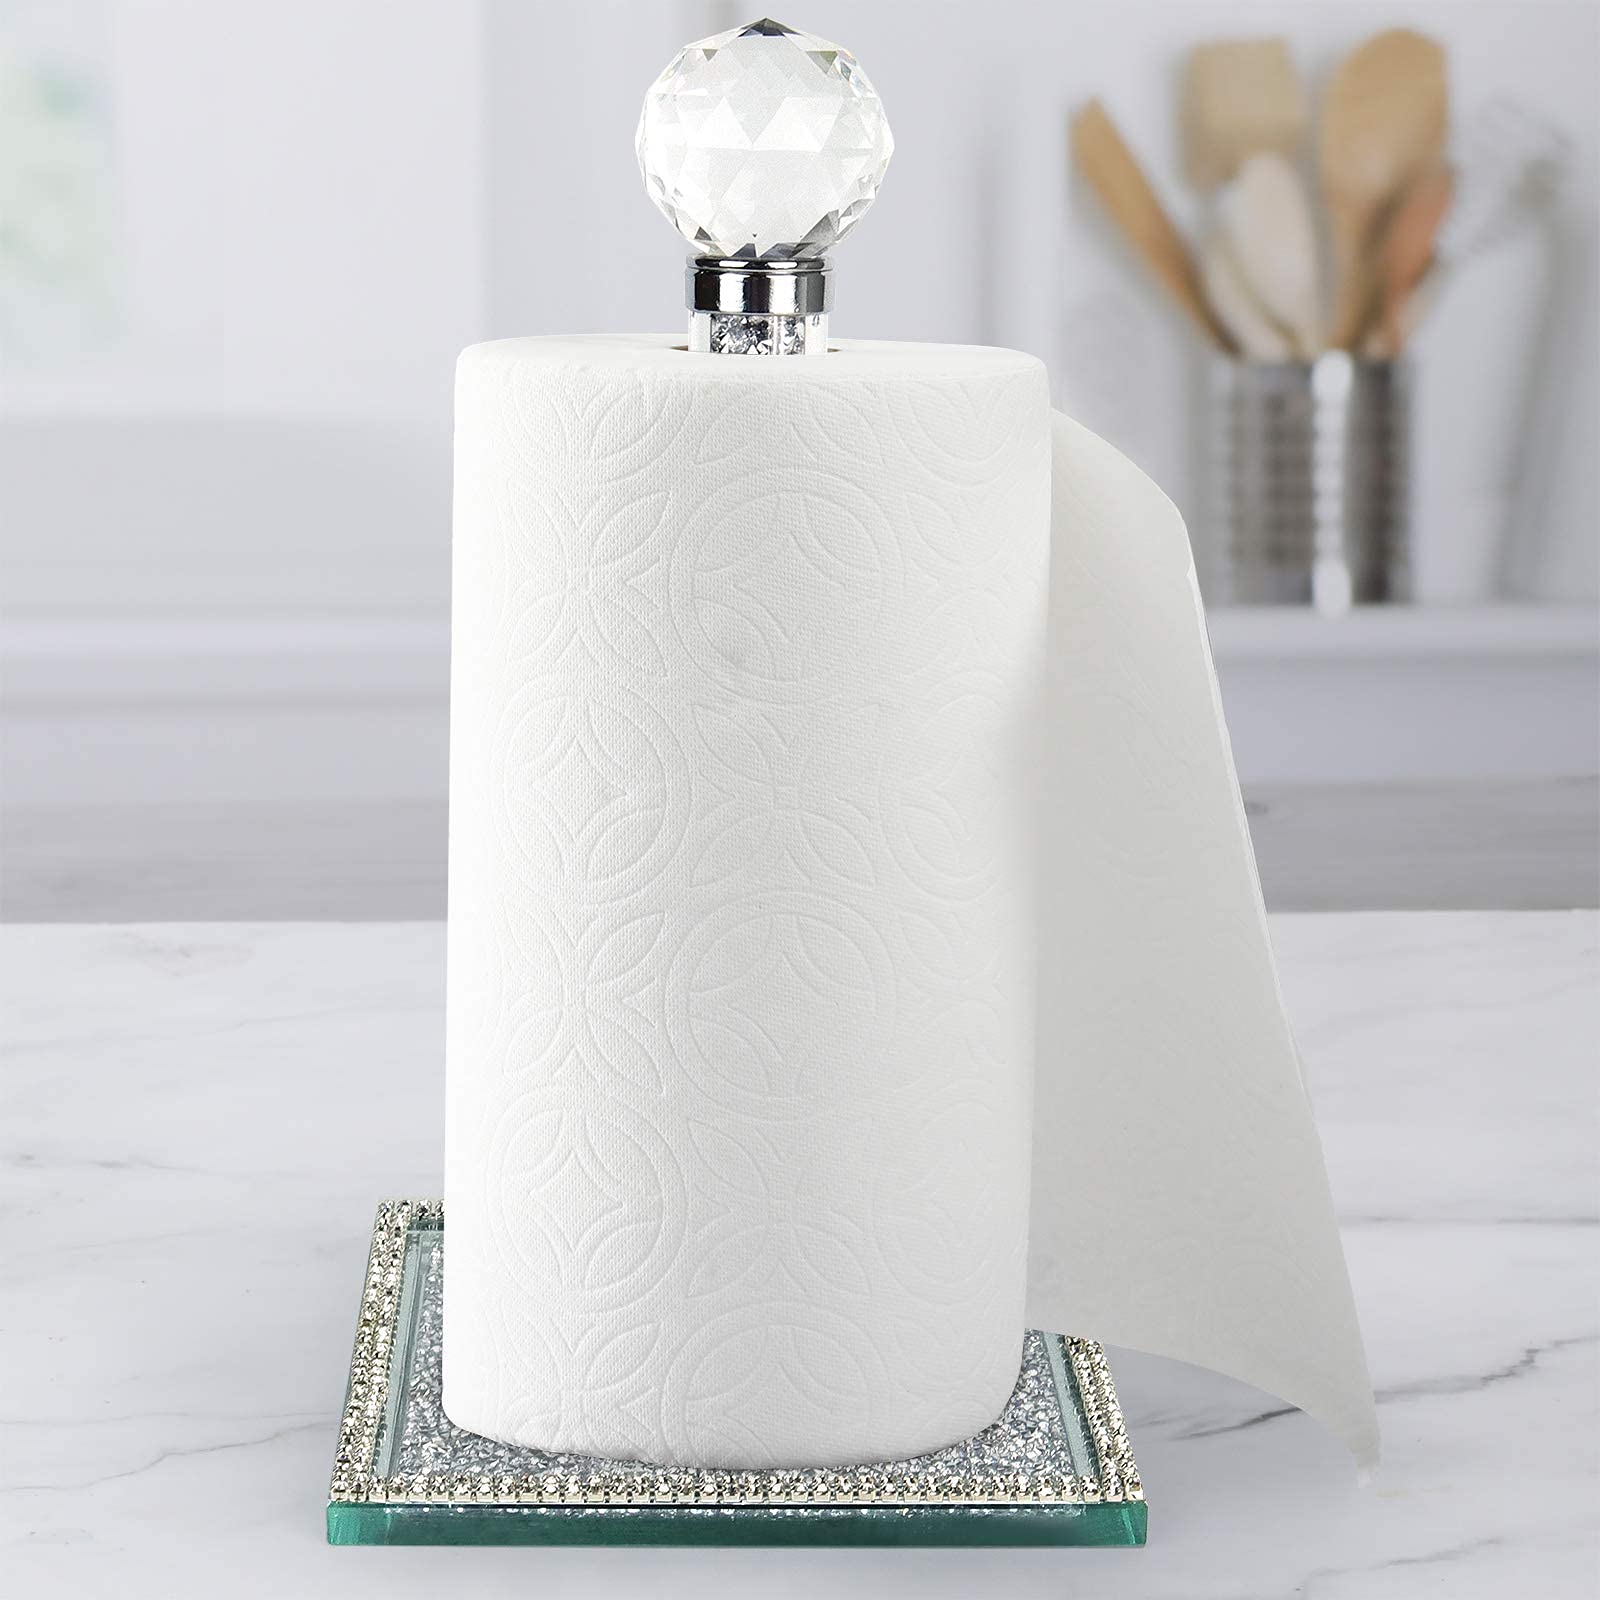 Paper Towel Holder Stand, Silver Countertop Paper Towel Roll Dispenser Holders with Square Base,Tissue Holder Filled with Sparkly Crystal Crushed Diamond House Decor for Kitchen Bathroom, Heavy Weight